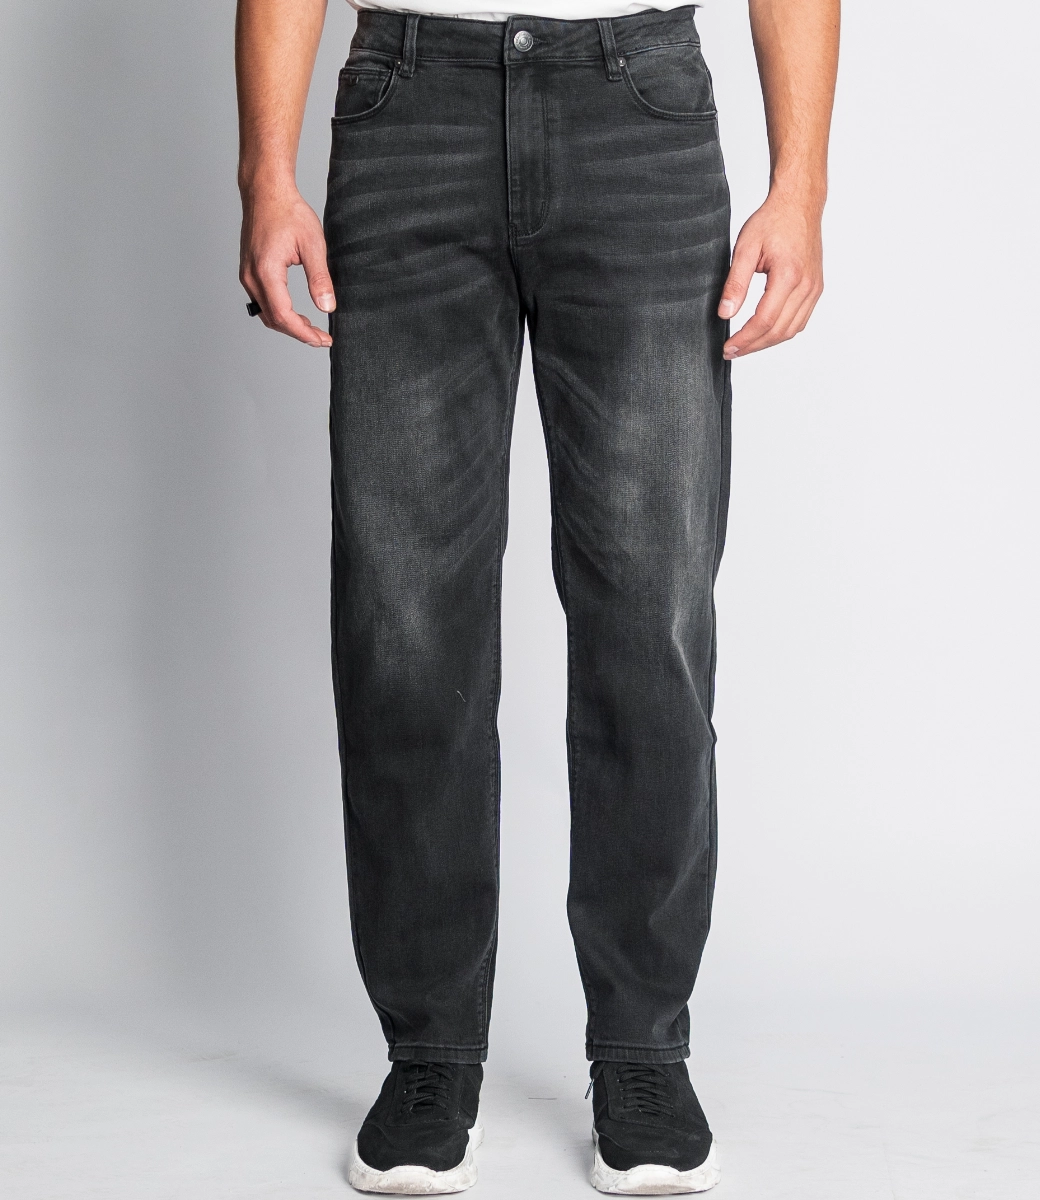 CASSIDY FancyBlack - Relaxed Fit Jeans